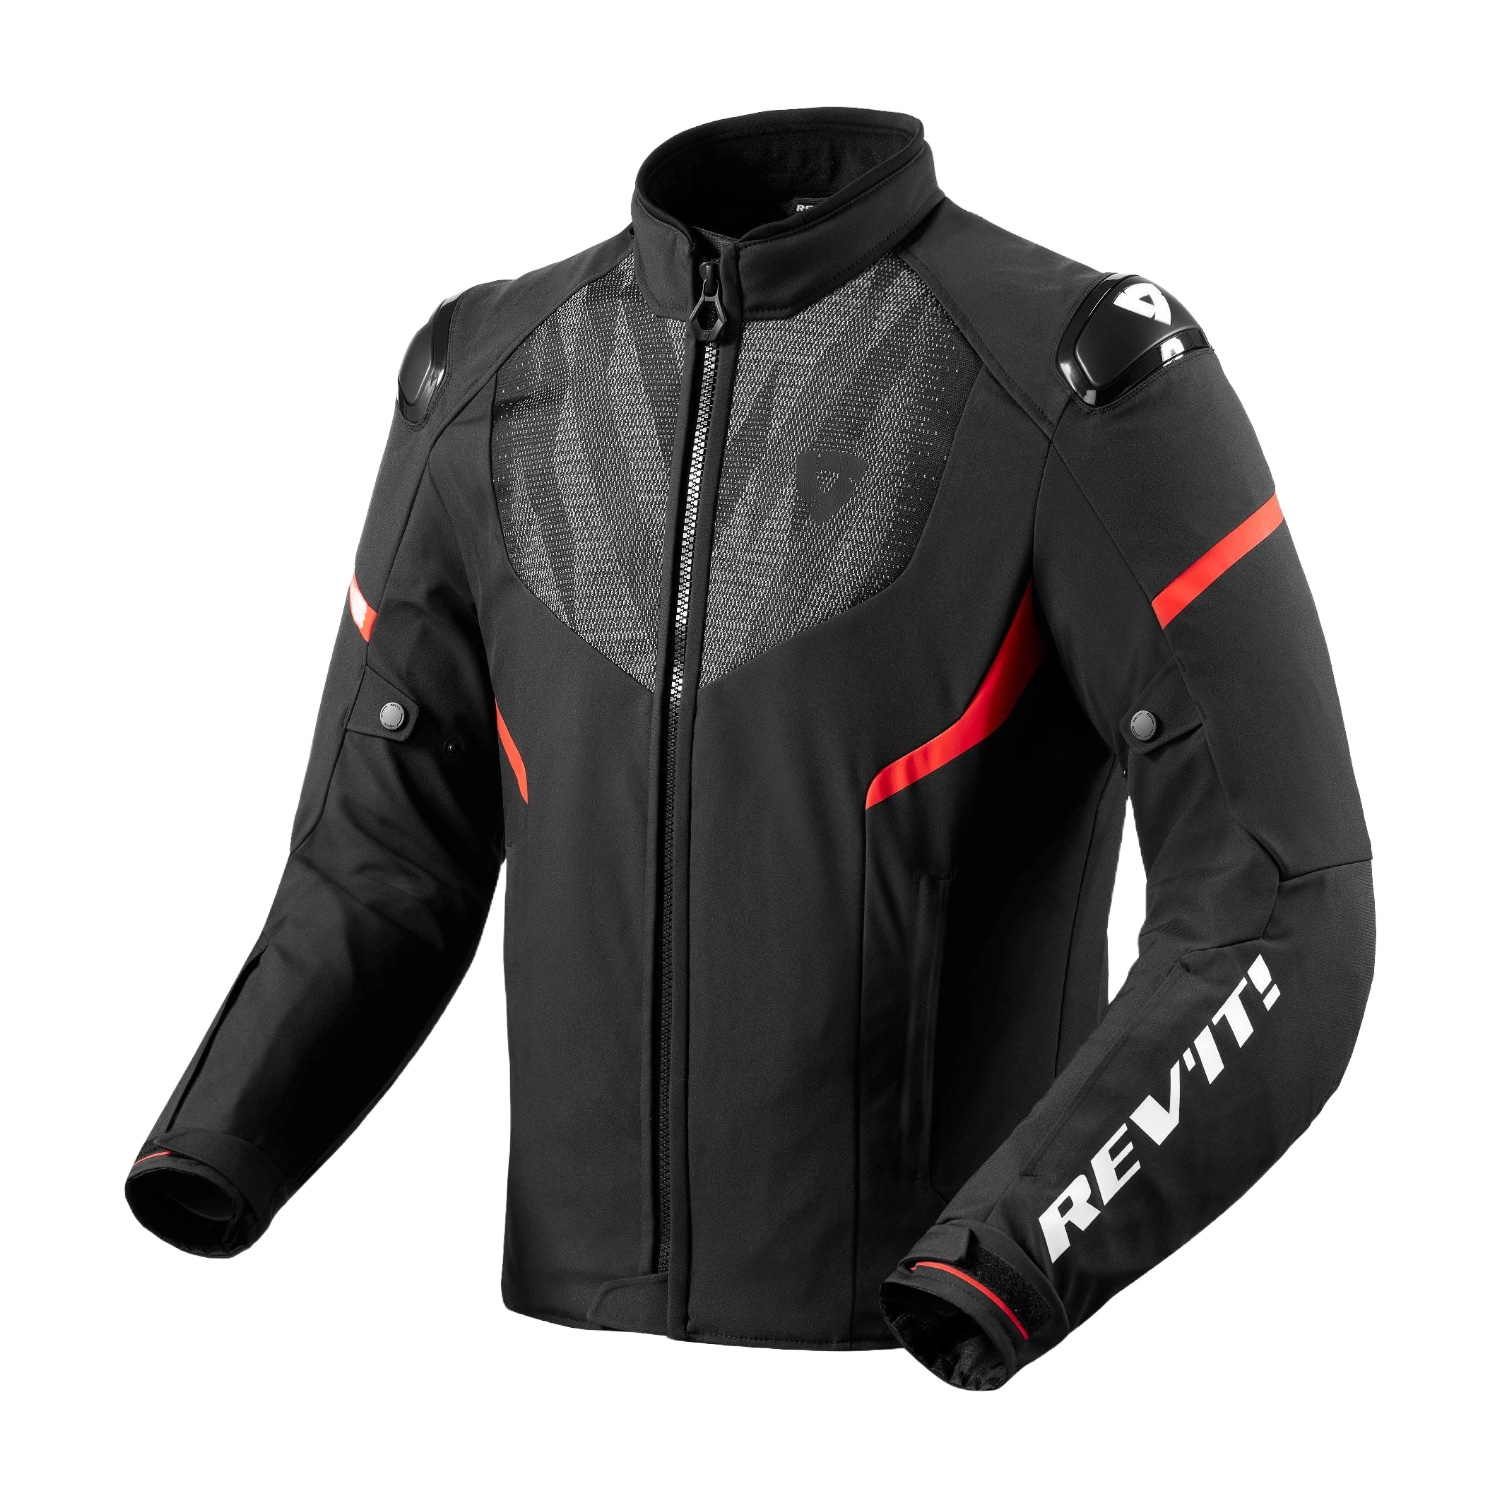 Image of REV'IT! Hyperspeed 2 H2O Jacket Black Neon Red Size M ID 8700001367233